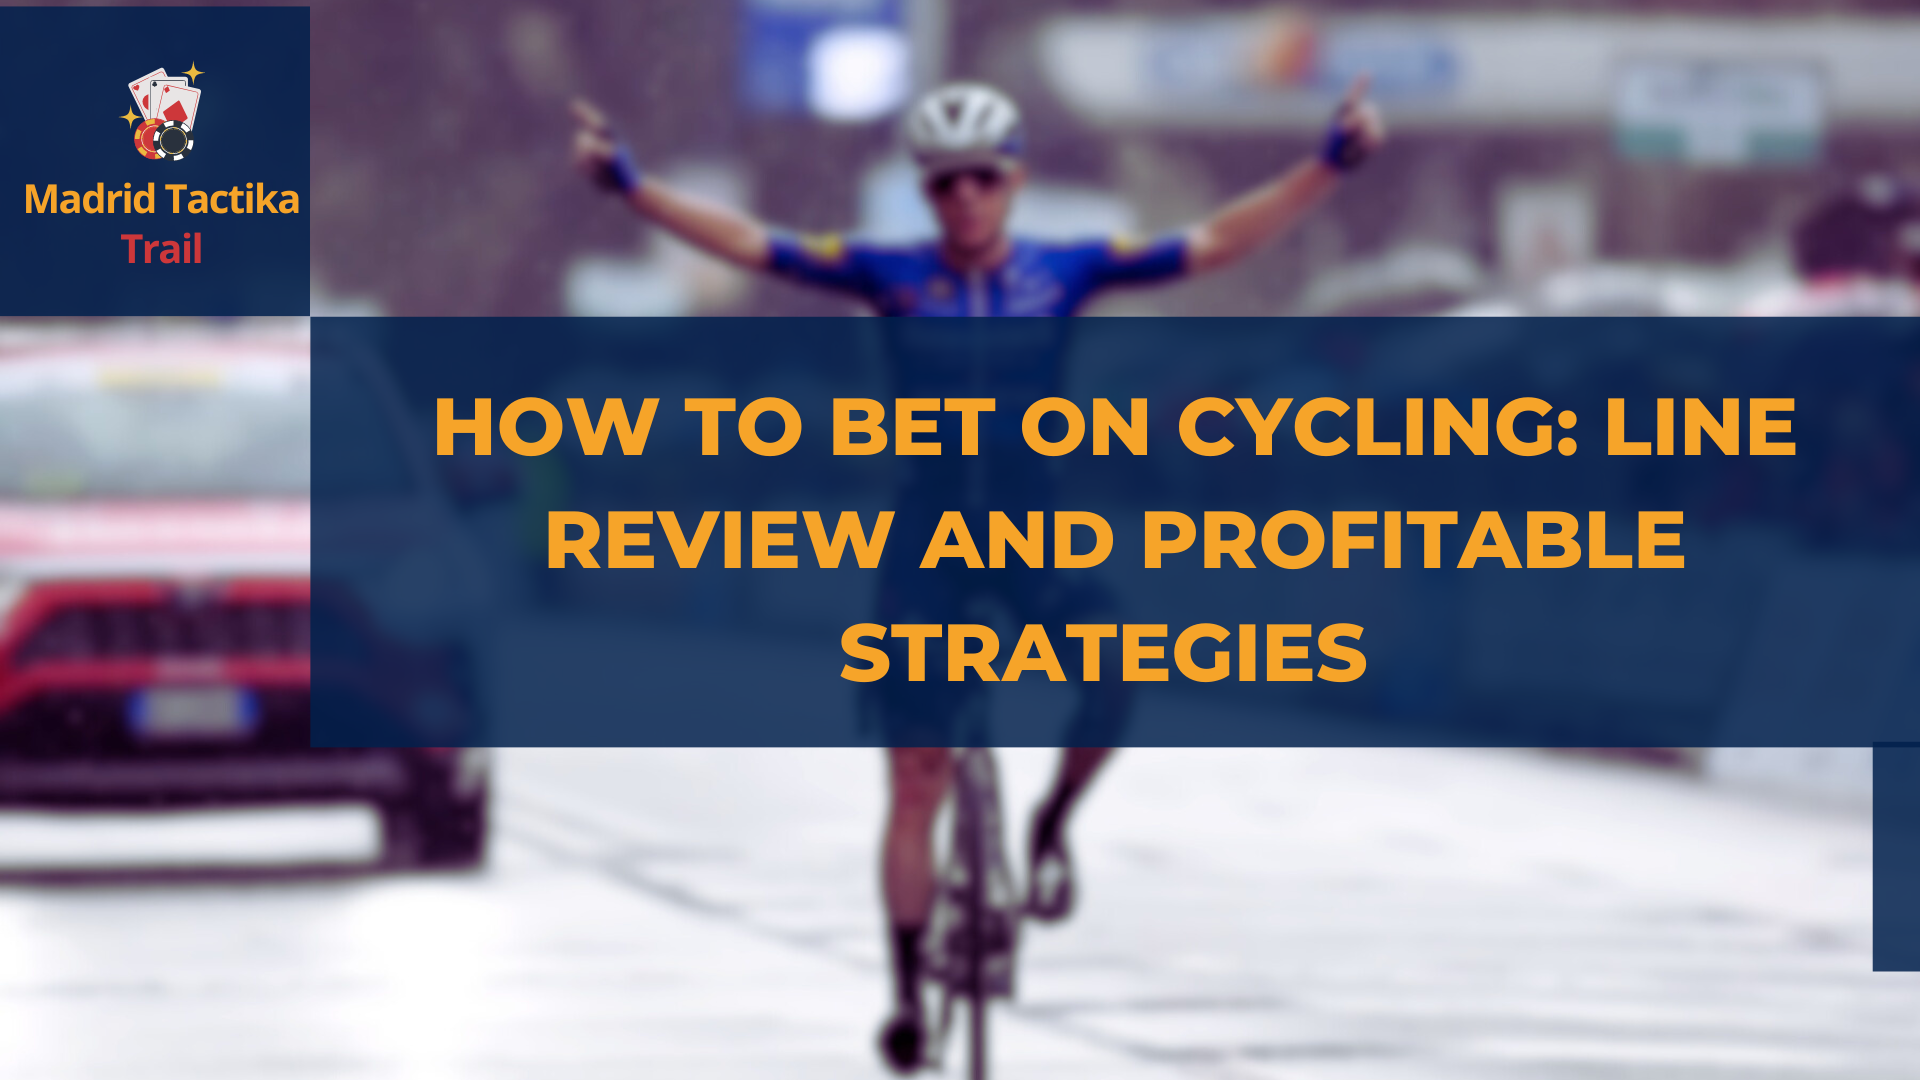 How to bet on cycling: line review and profitable strategies 